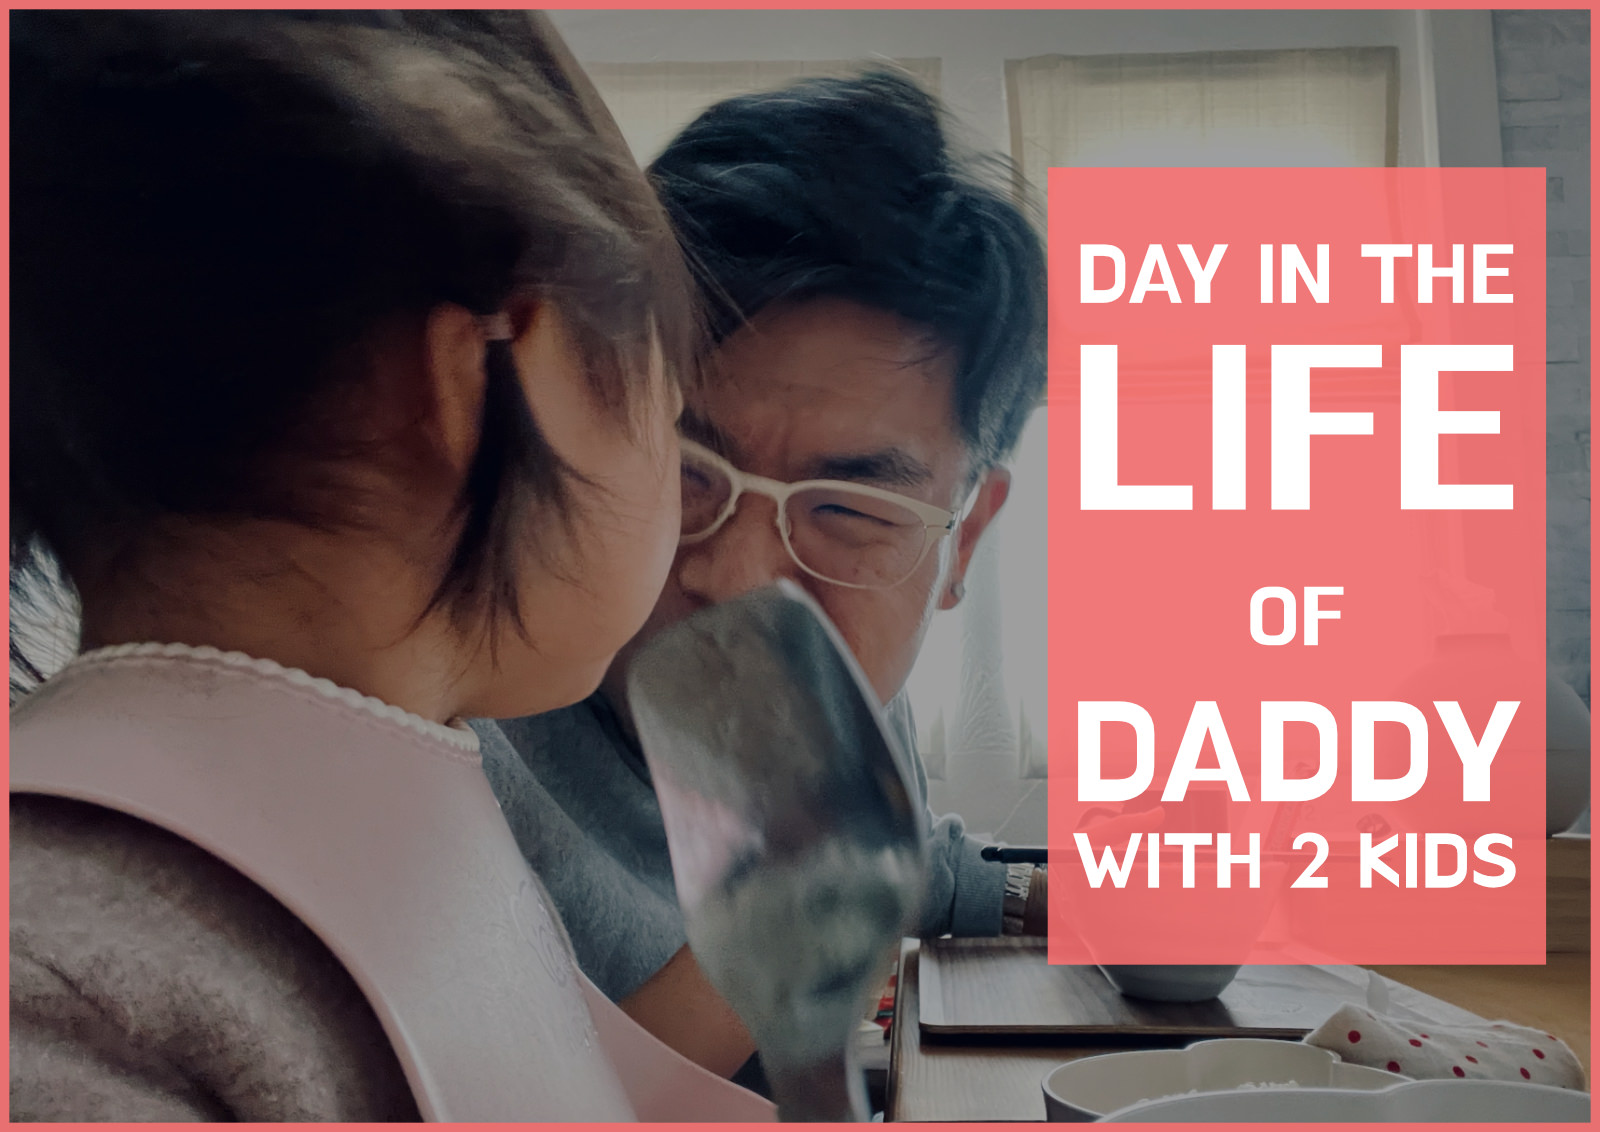 A-day-in-the-life-of-daddy-with-2-kids.jpg